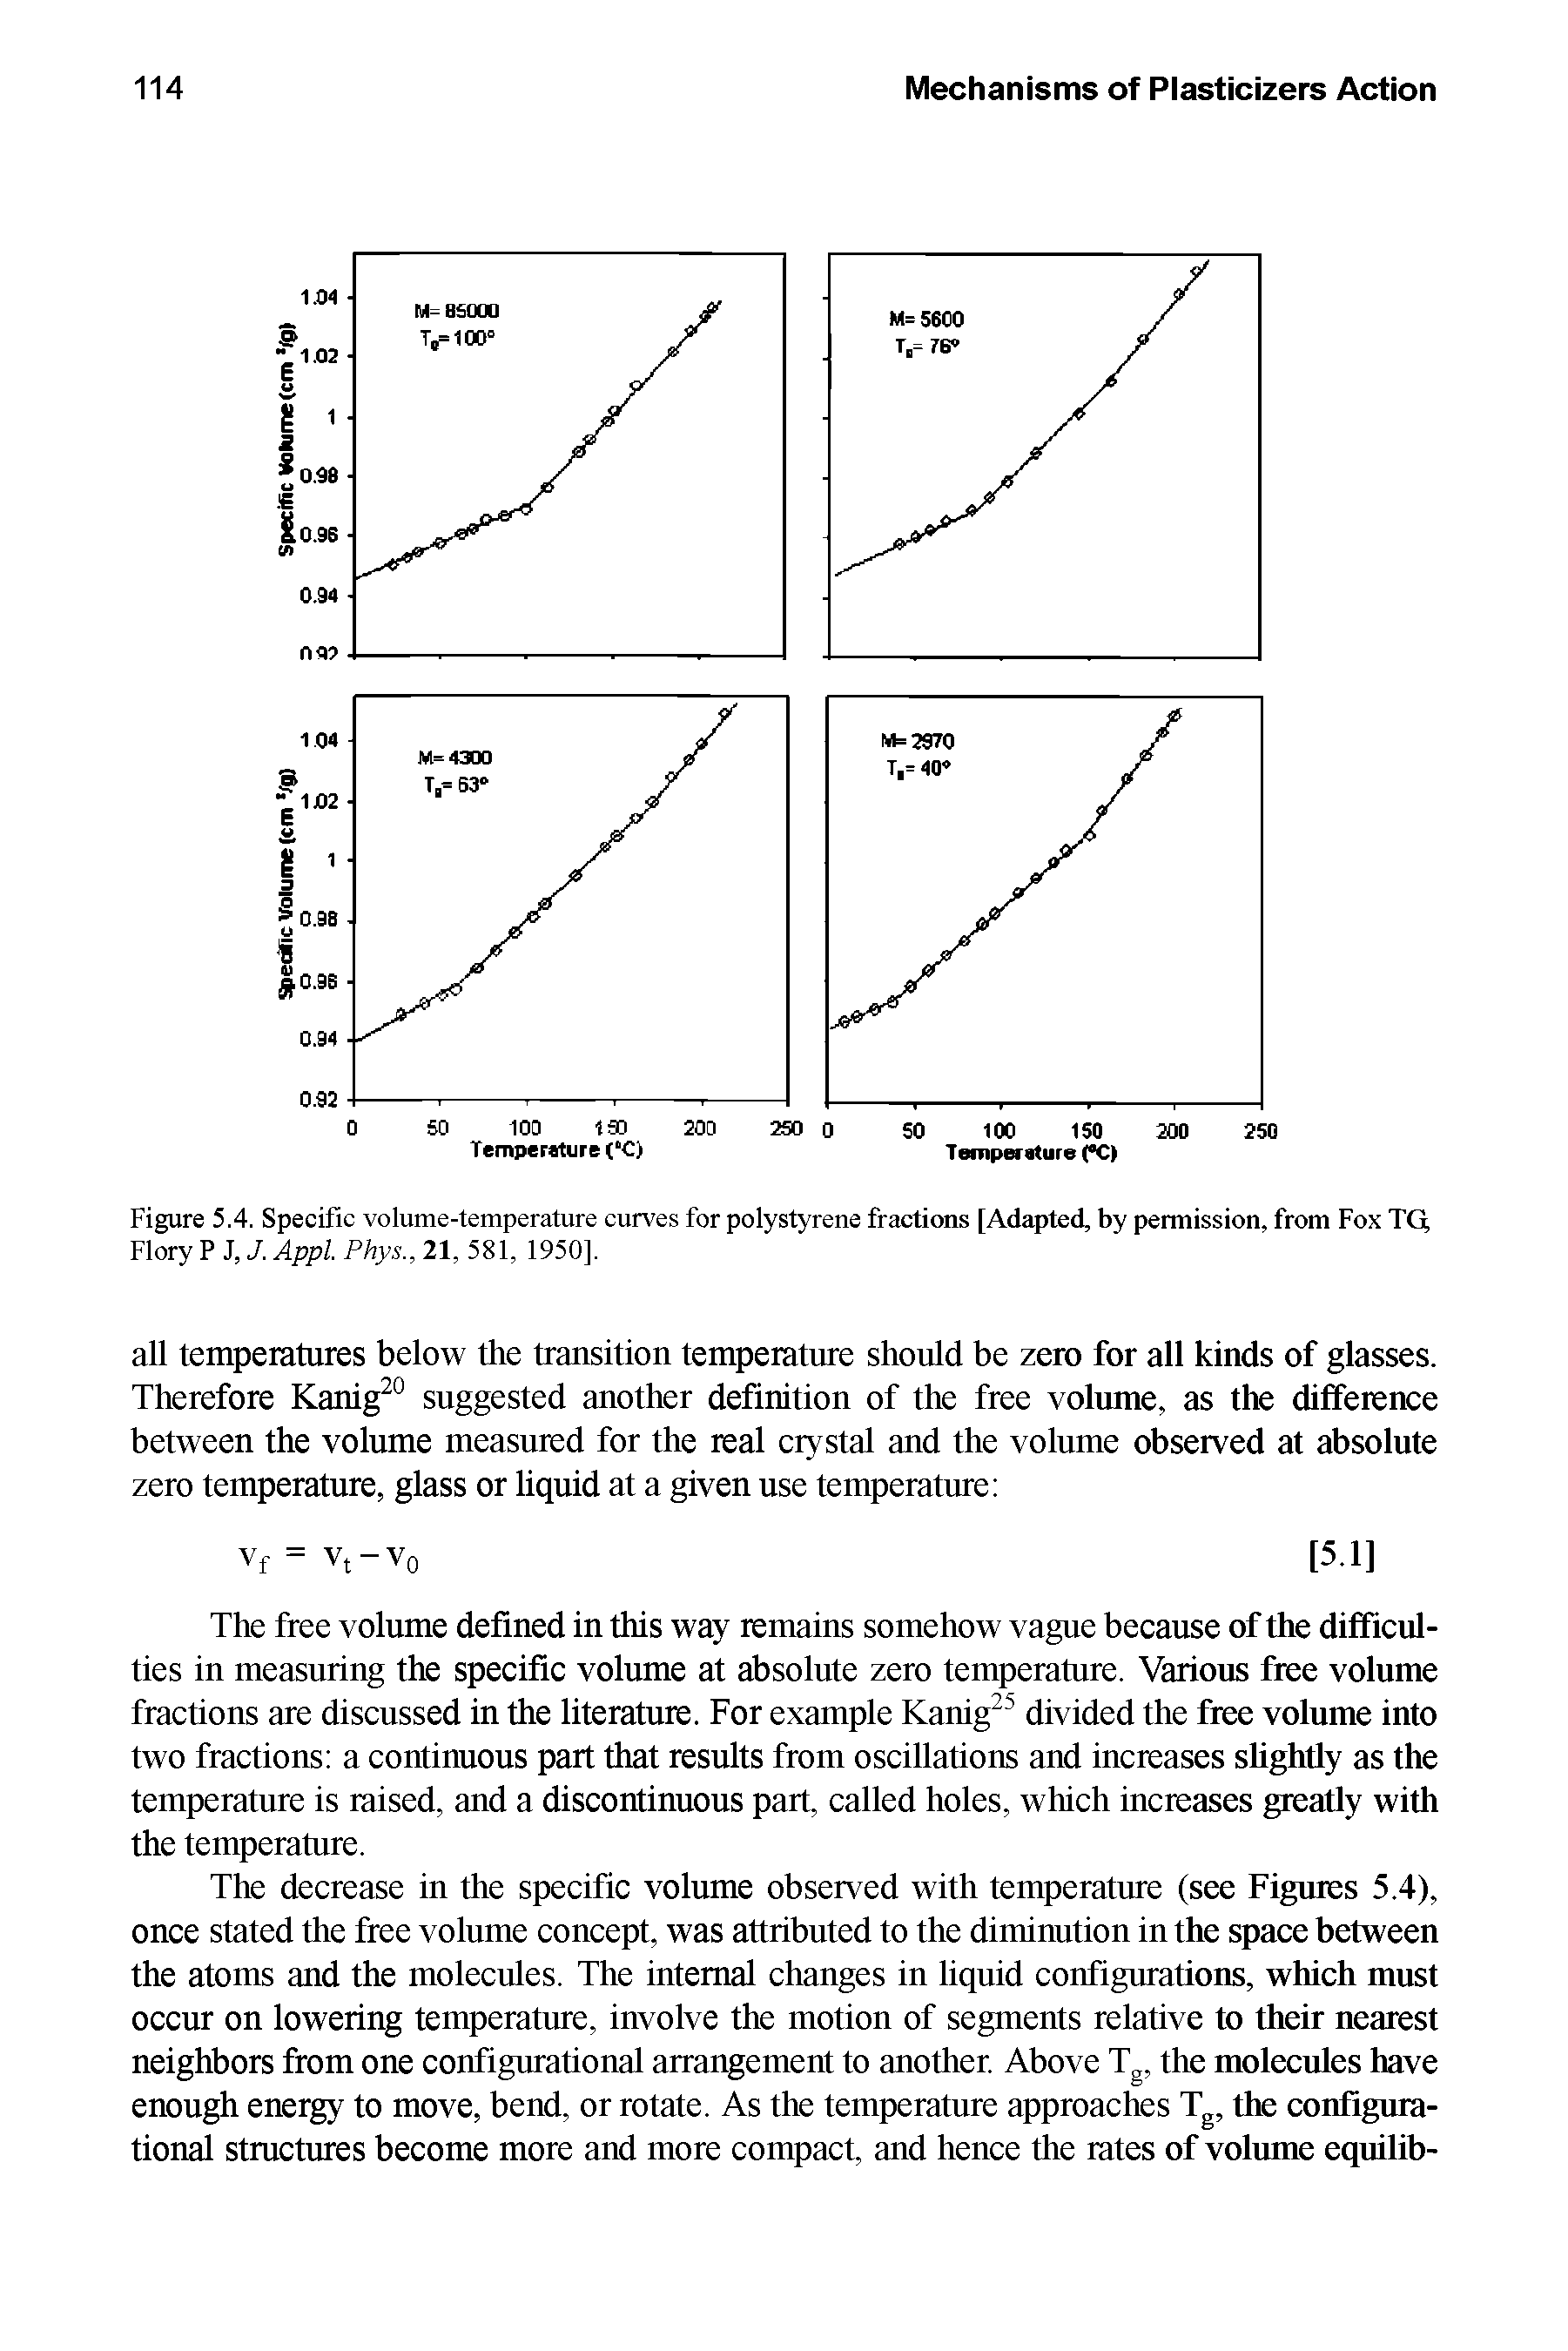 Figure 5.4. Specific volume-temperature curves for polystyrene fractions [Adapted, by permission, from Fox TQ Flory P J, J. Appl Phys., 21, 581, 1950].